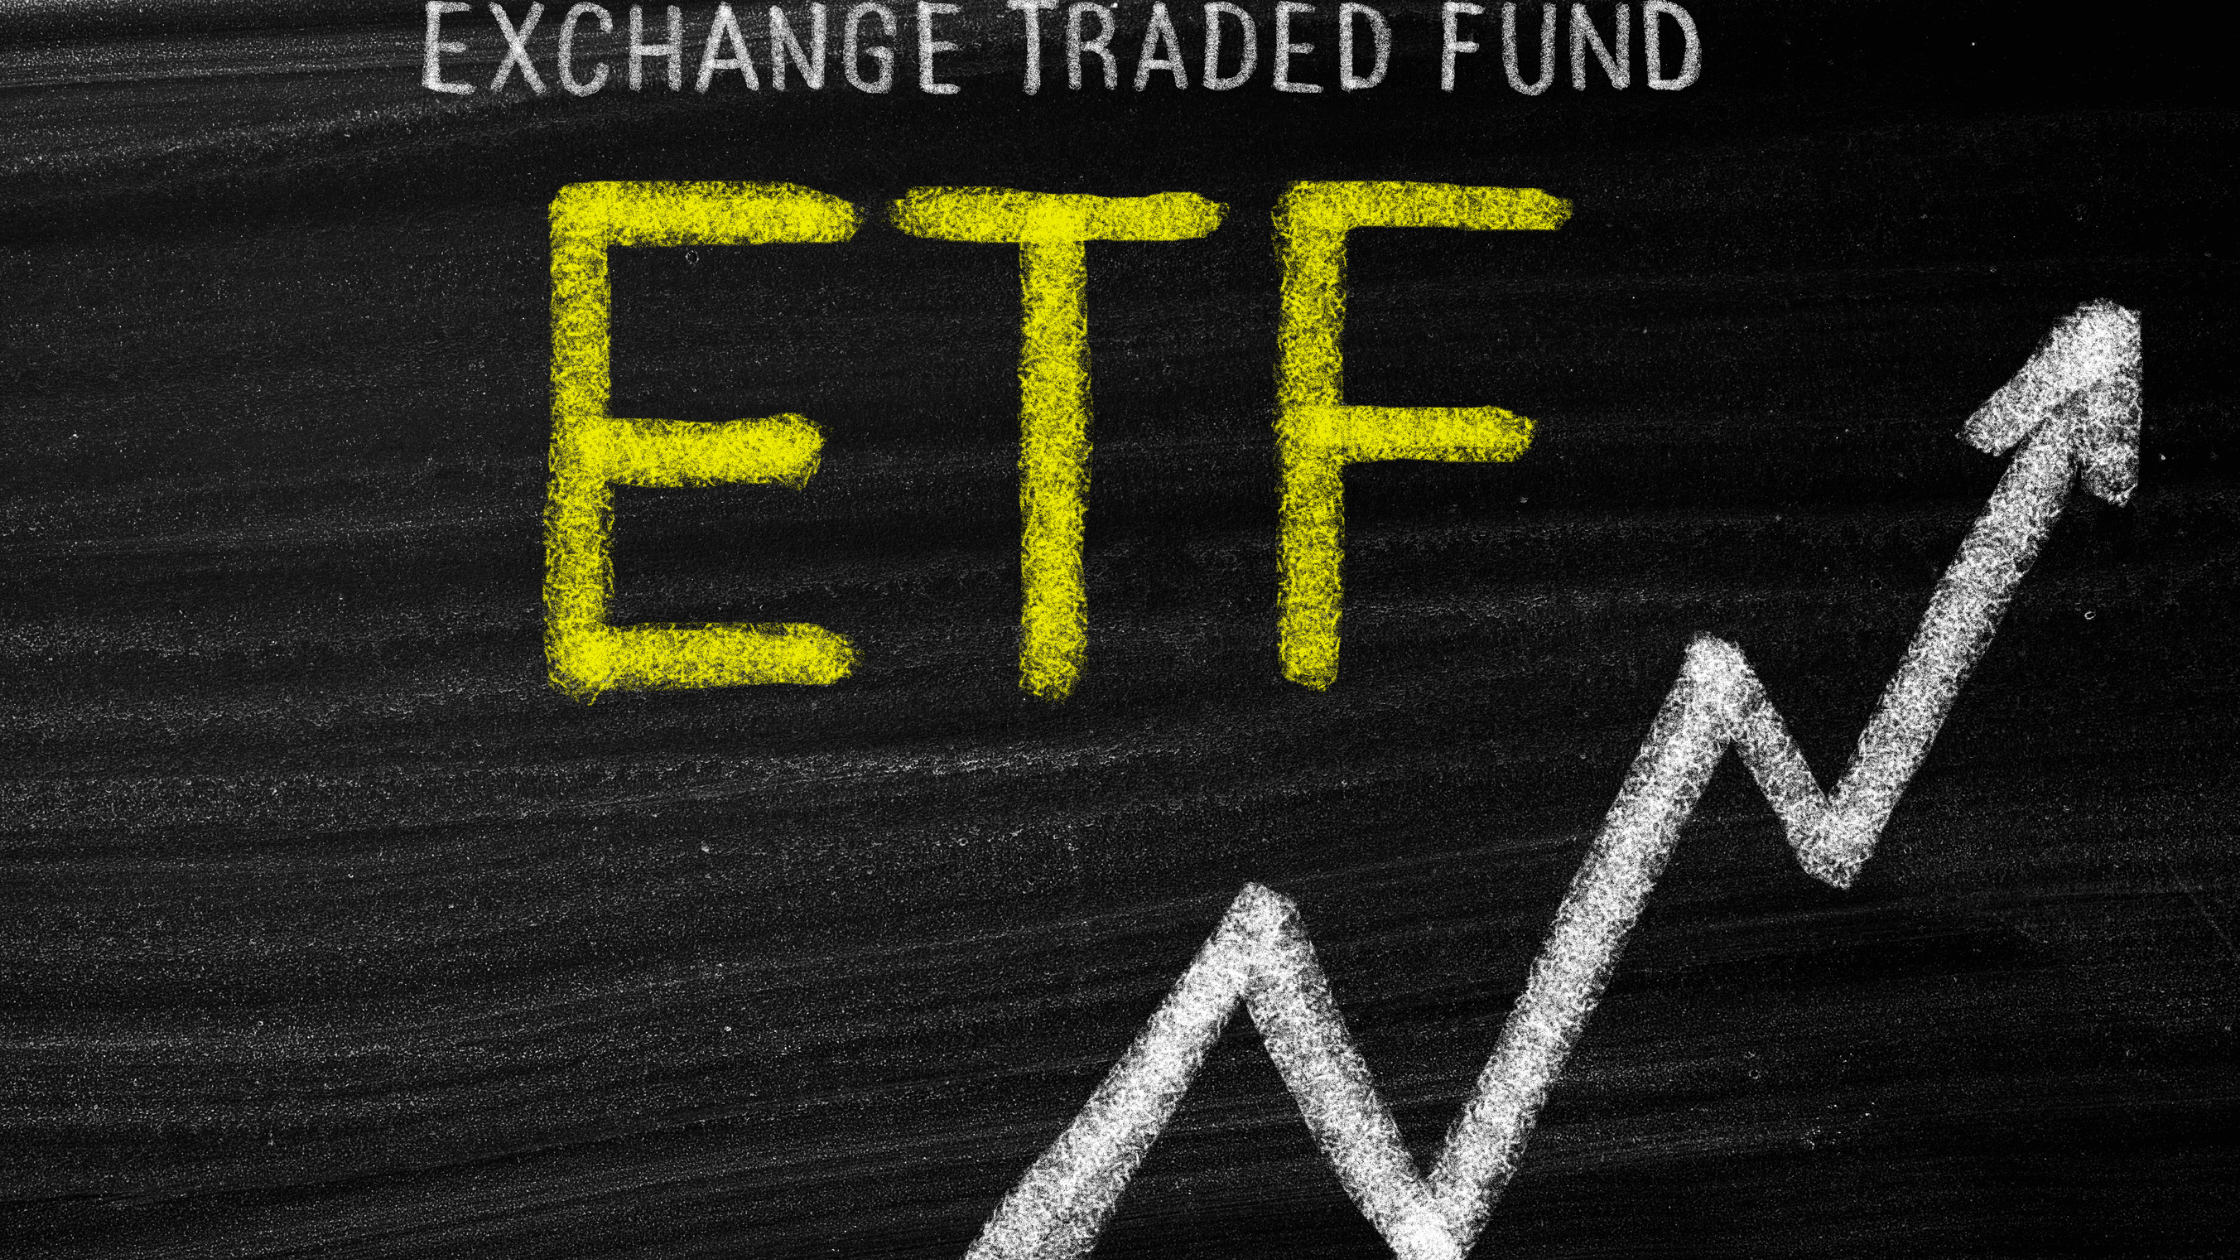 Invest - Exchange traded funds ETF